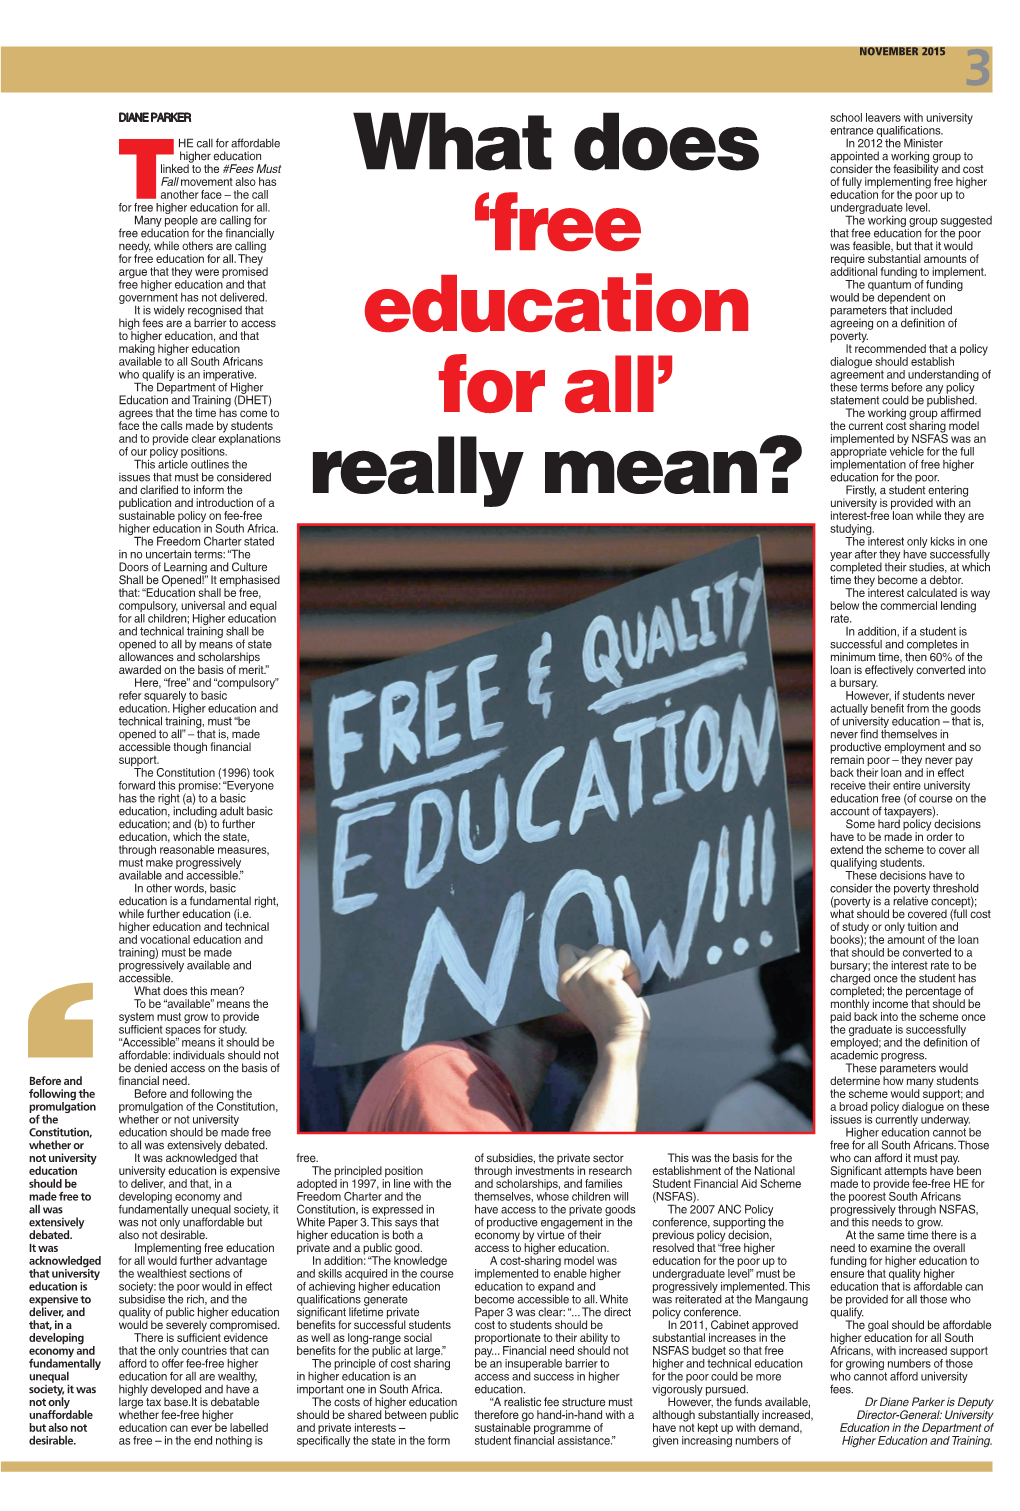 What Does 'Free Education for All' Really Mean?